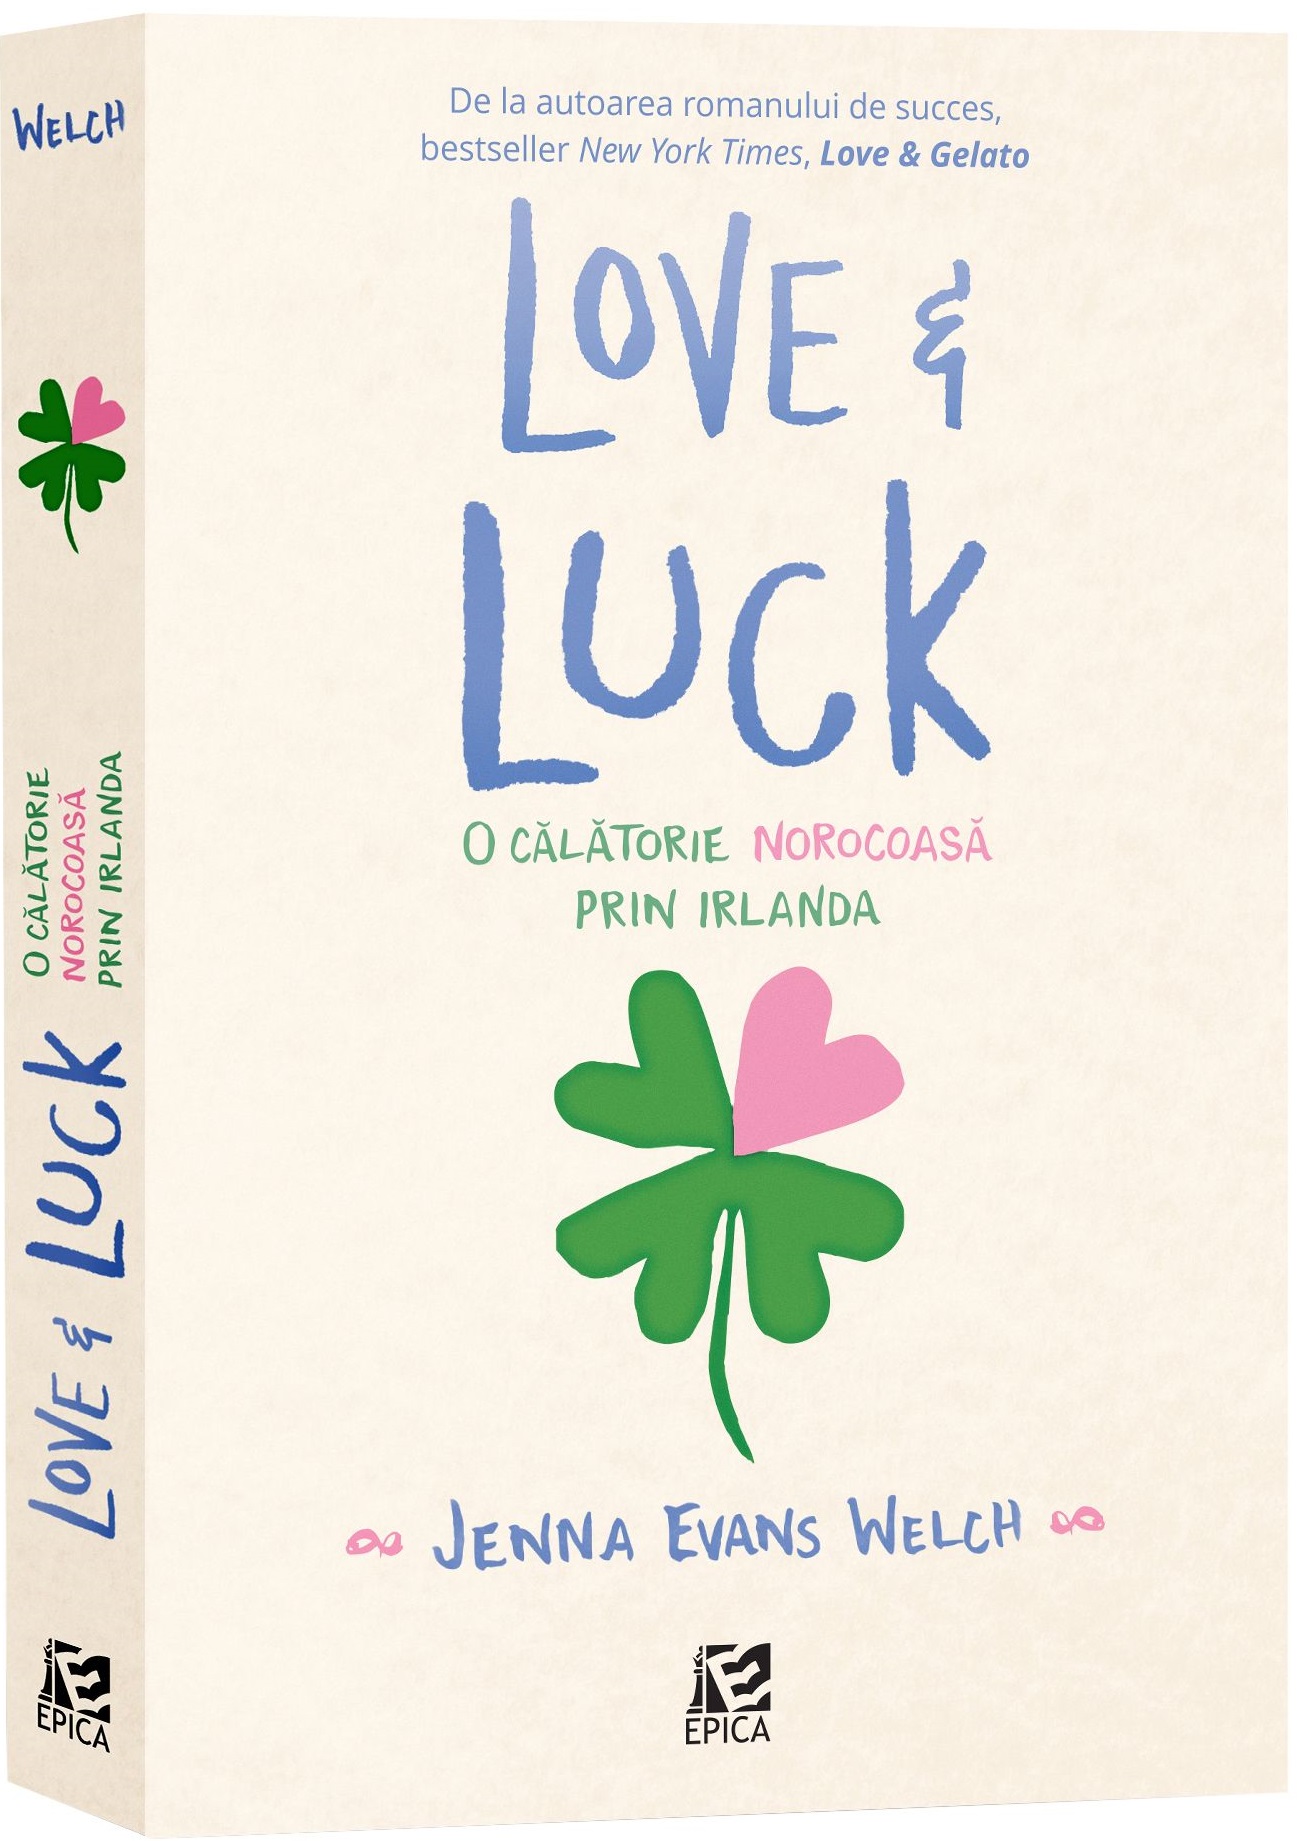 love & luck by jenna evans welch